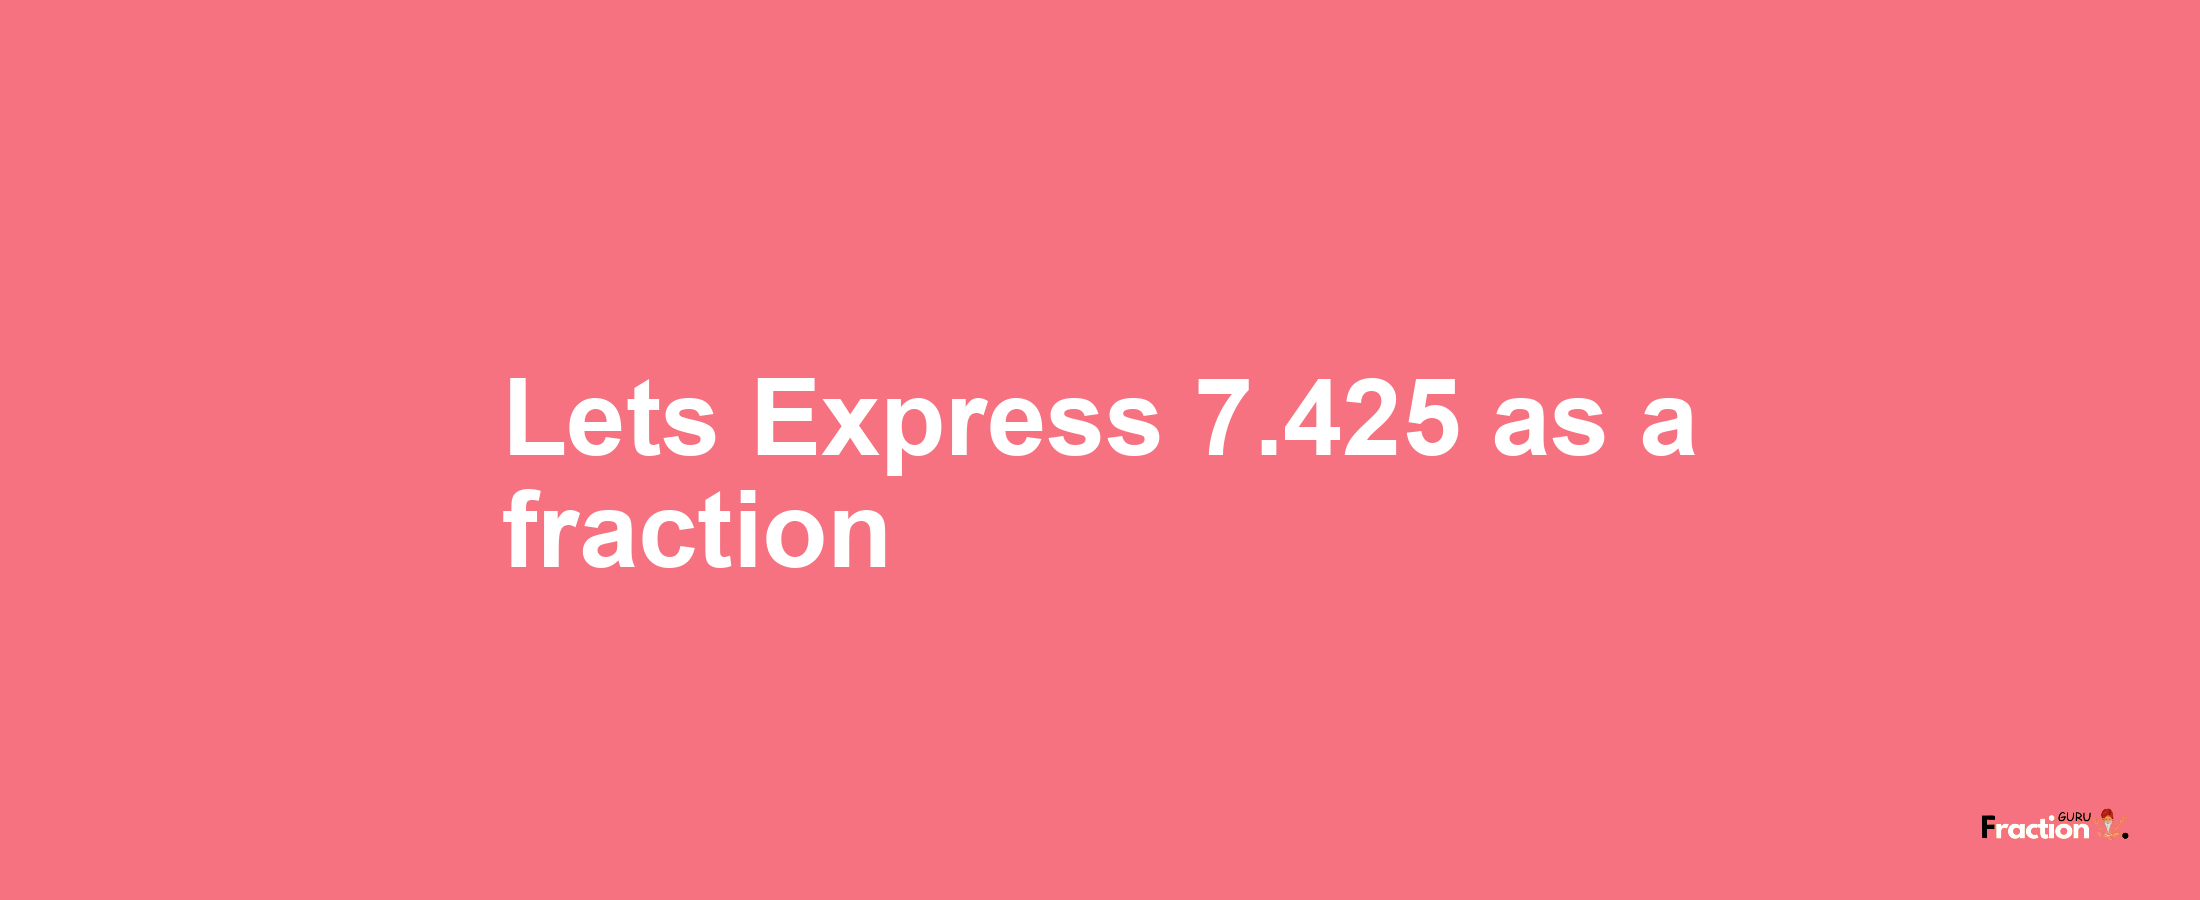 Lets Express 7.425 as afraction